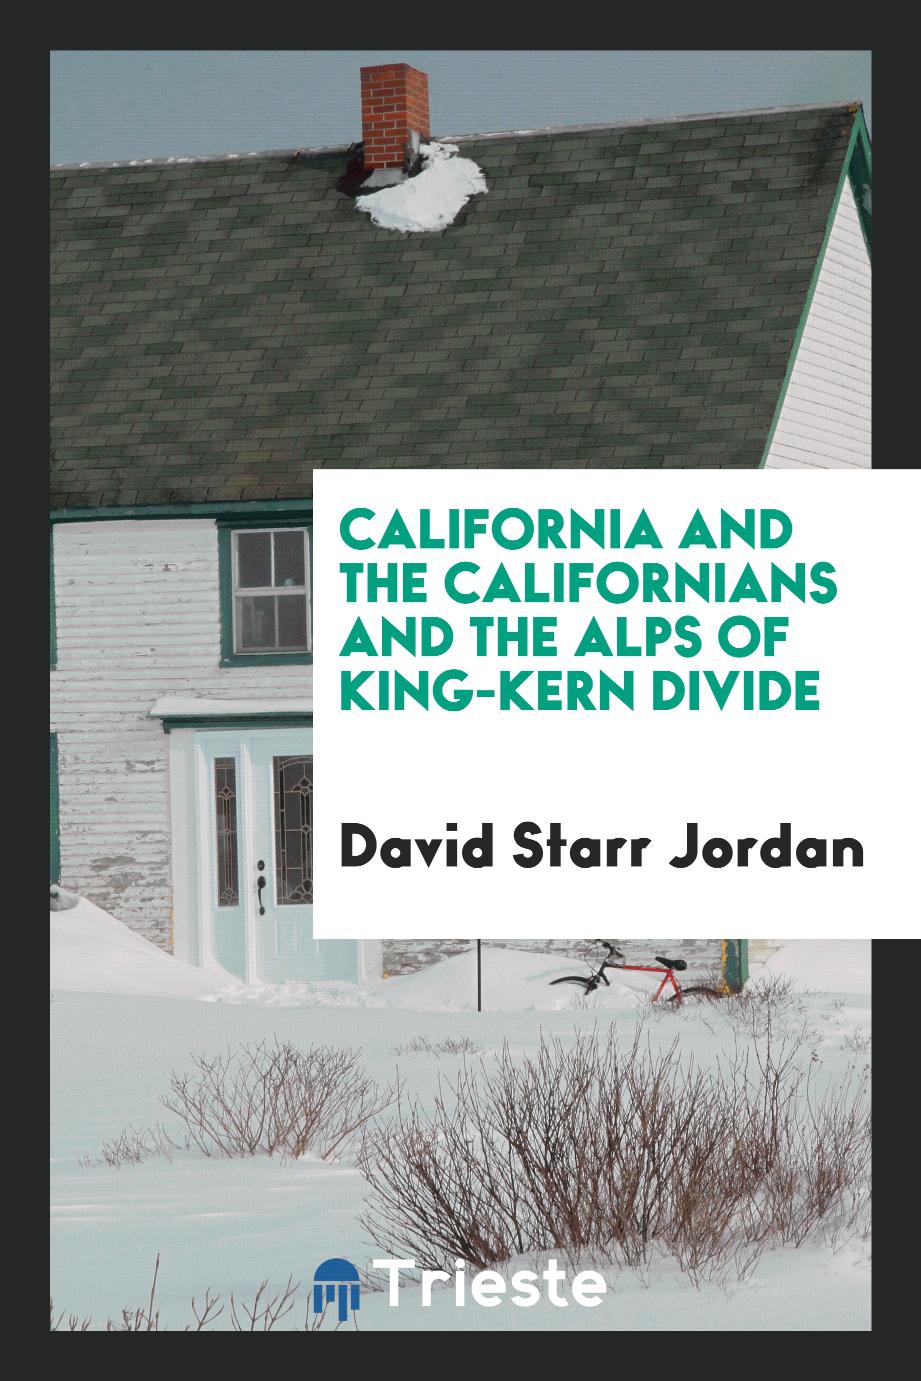 California and the Californians and the Alps of King-Kern Divide